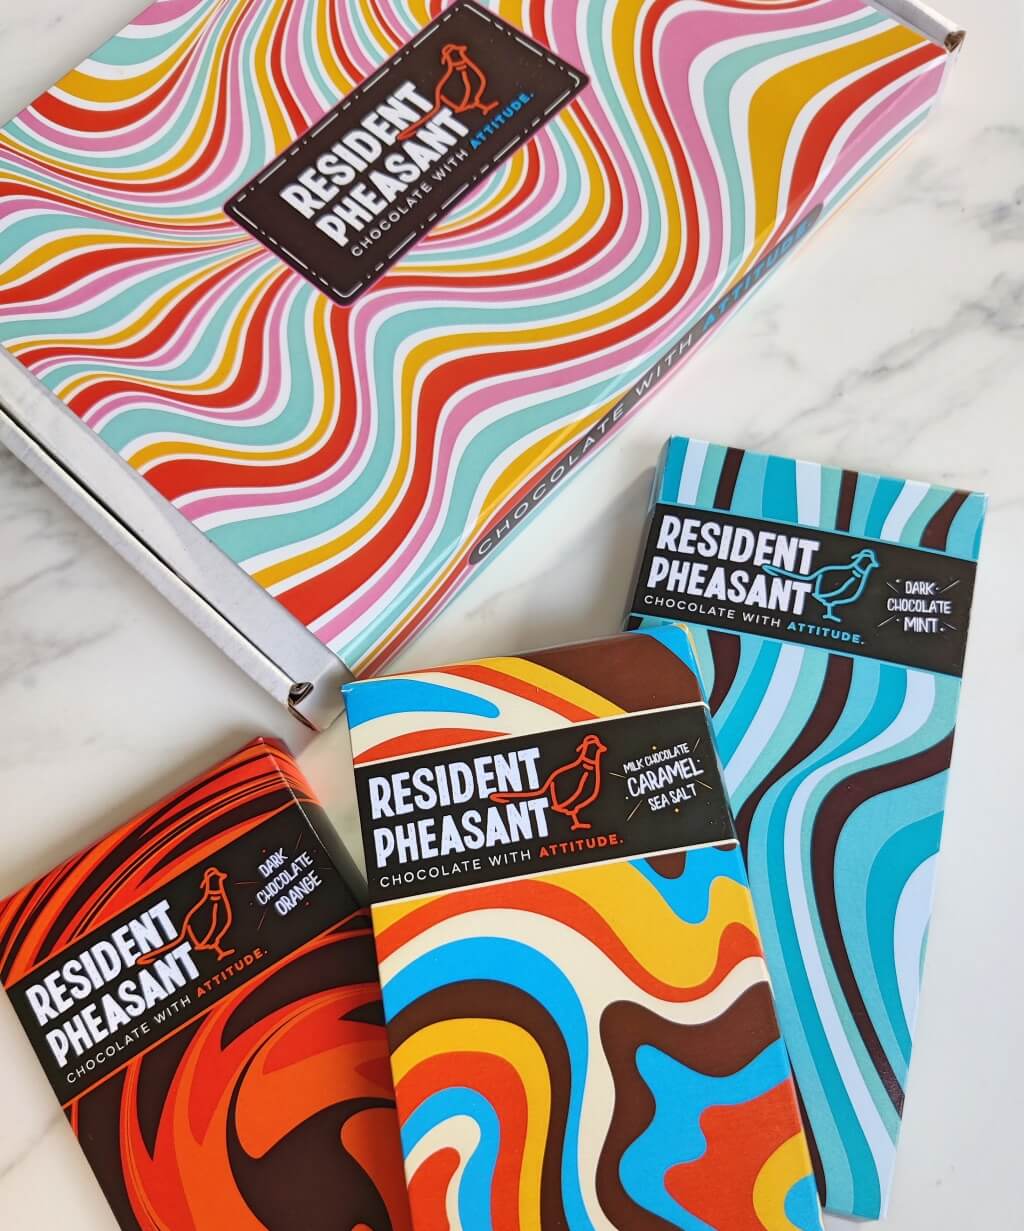 Resident Pheasant chocolate cocoa corporate gifting blog